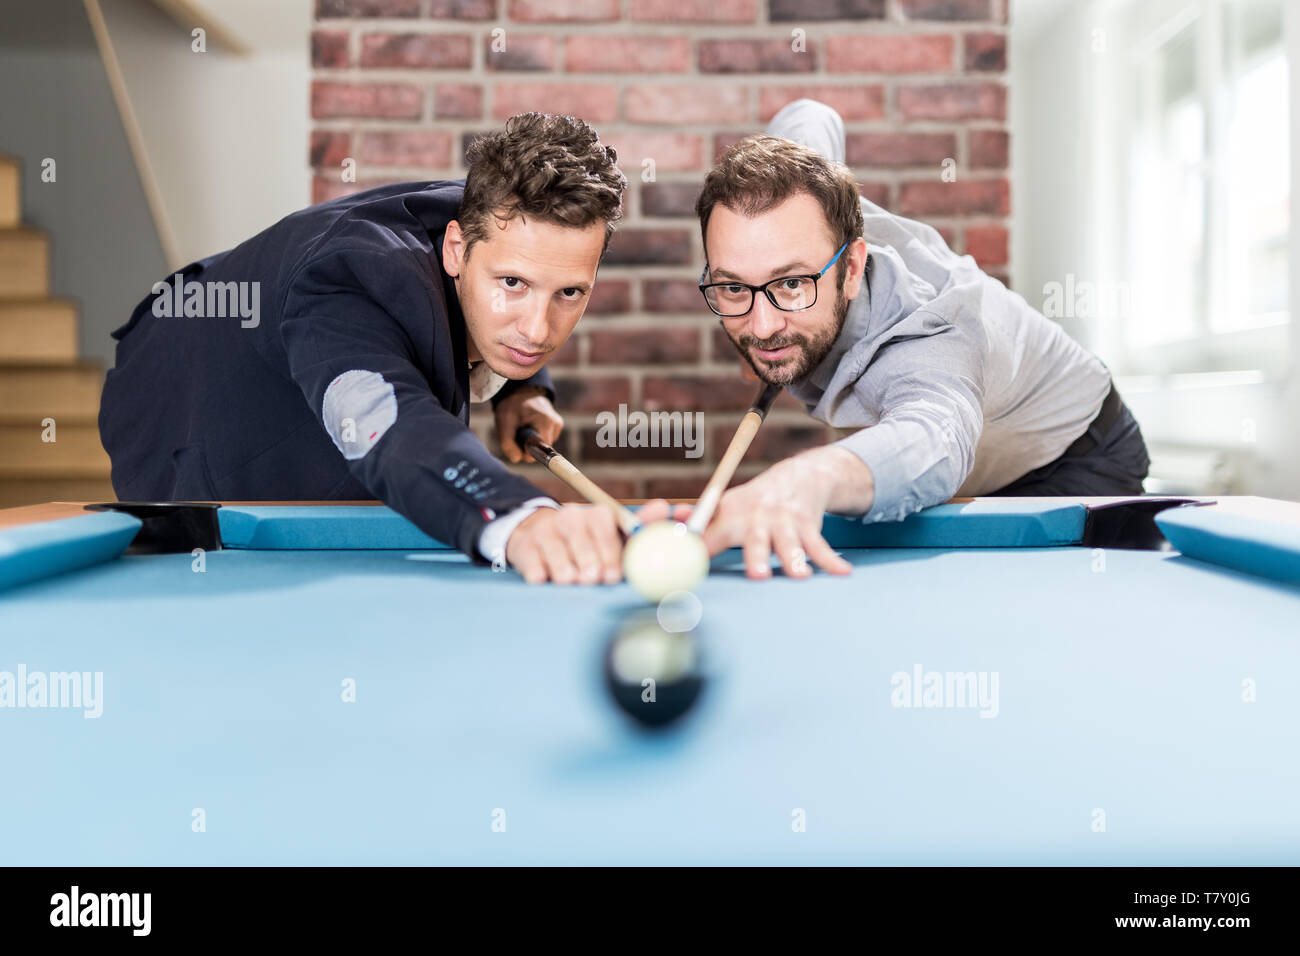 Friends Cheering While Their Friend Aiming For Billiards Ball Stock Photo -  Download Image Now - iStock